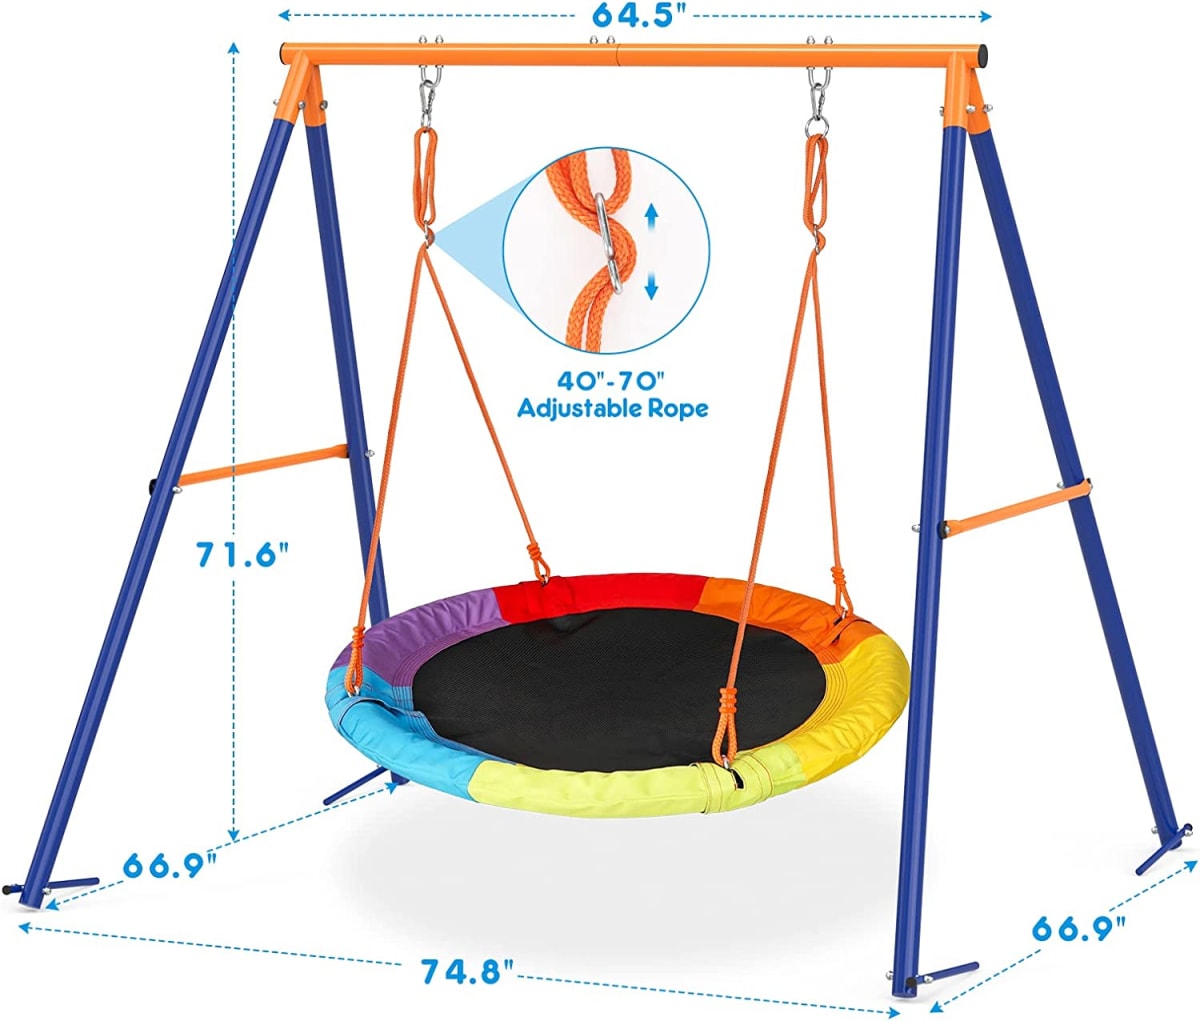 Saucer Swing with Stand for Kids Outdoor, 440lbs Swing Set with Heavy-Duty Metal Frame and Adjustable Ropes, Safe Waterproof Round Swing for Backyard Playground Park, Rainbow Color